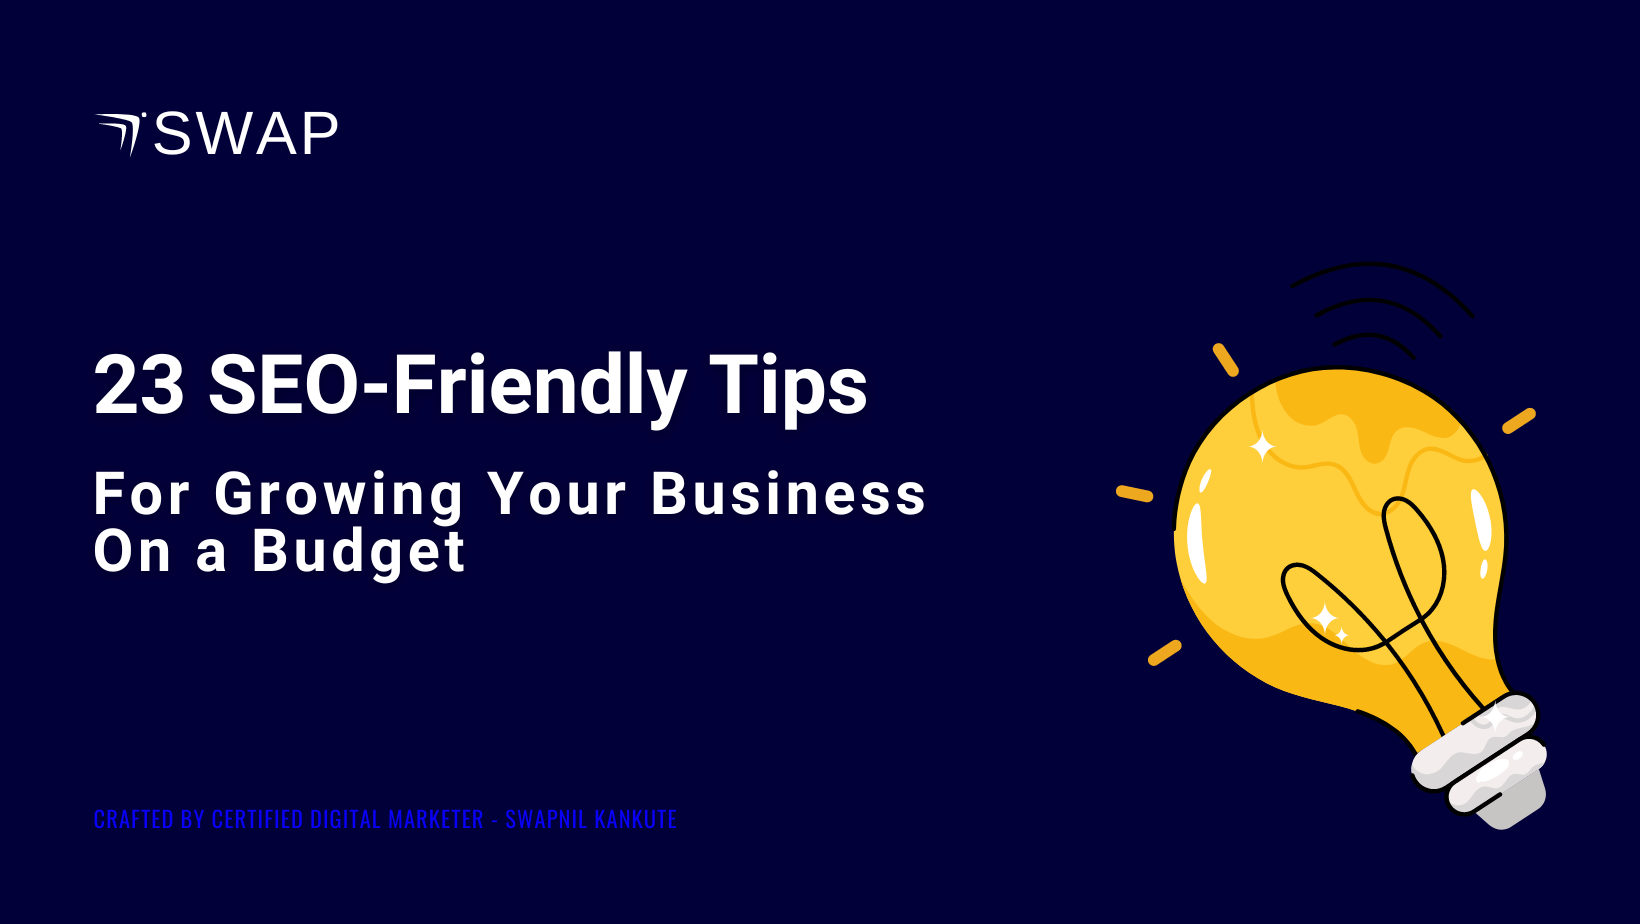 23 SEO-Friendly Tips for Growing Your Business on a Budget